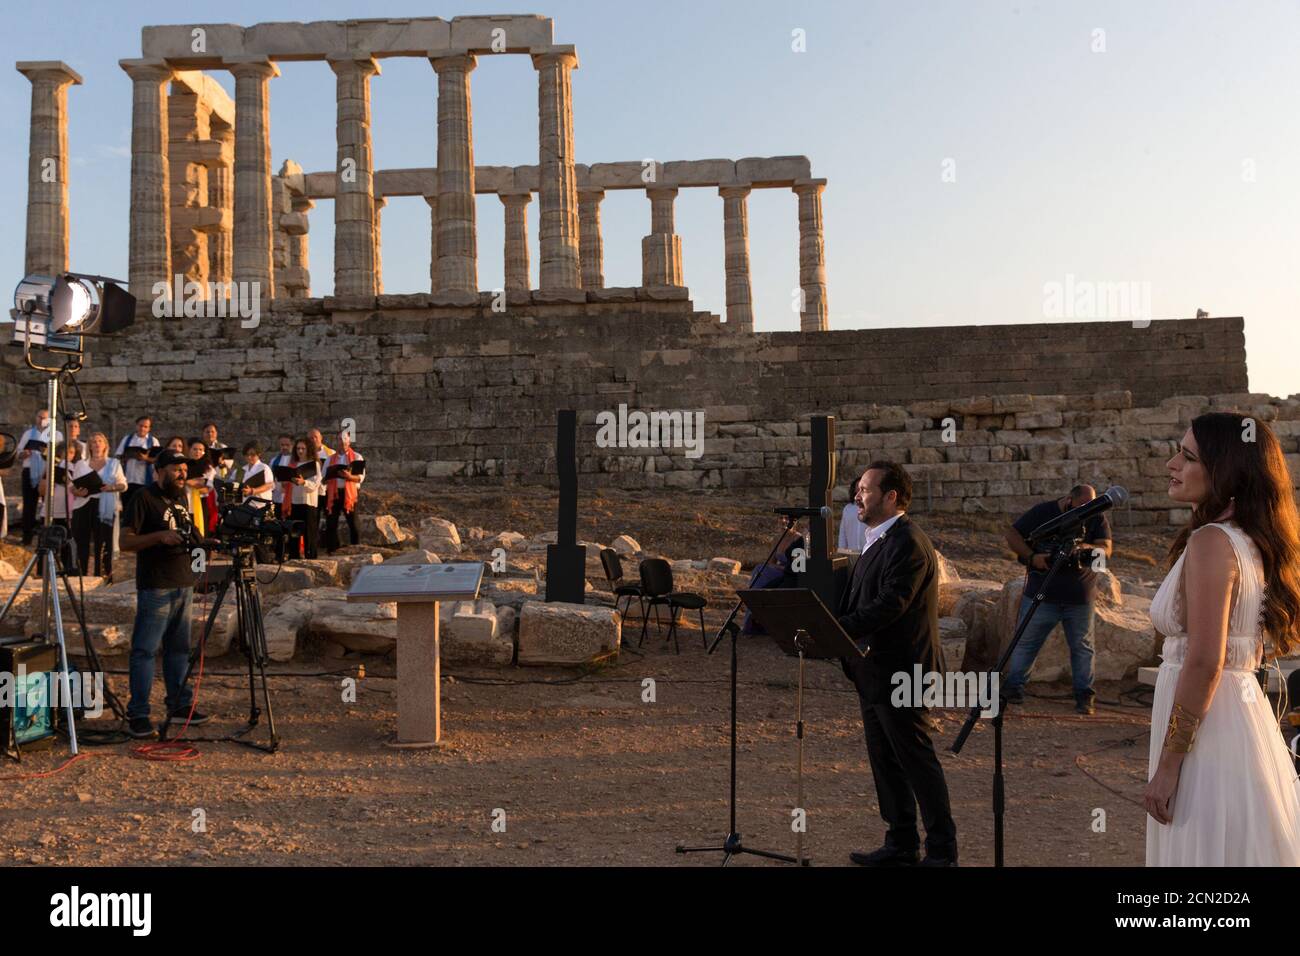 (200917) -- ATHENS, Sept. 17, 2020 (Xinhua) -- Singers perform a musical in front of the ruins of the Temple of Poseidon at cape Sounion, some 70 km southeast of Athens, Greece, on Sept. 17, 2020. On the occasion of the 70th anniversary of the establishment of the Greek National Tourism Organization (GNTO) and the 71st anniversary of the founding of the People's Republic of China and the Mid-Autumn festival, a musical entitled 'As long as there shall be Achaeans -- Variations on a Sunbeam' was staged on Thursday in front of the ruins of the emblematic 2,500-year-old Temple of Poseidon, the god Stock Photo